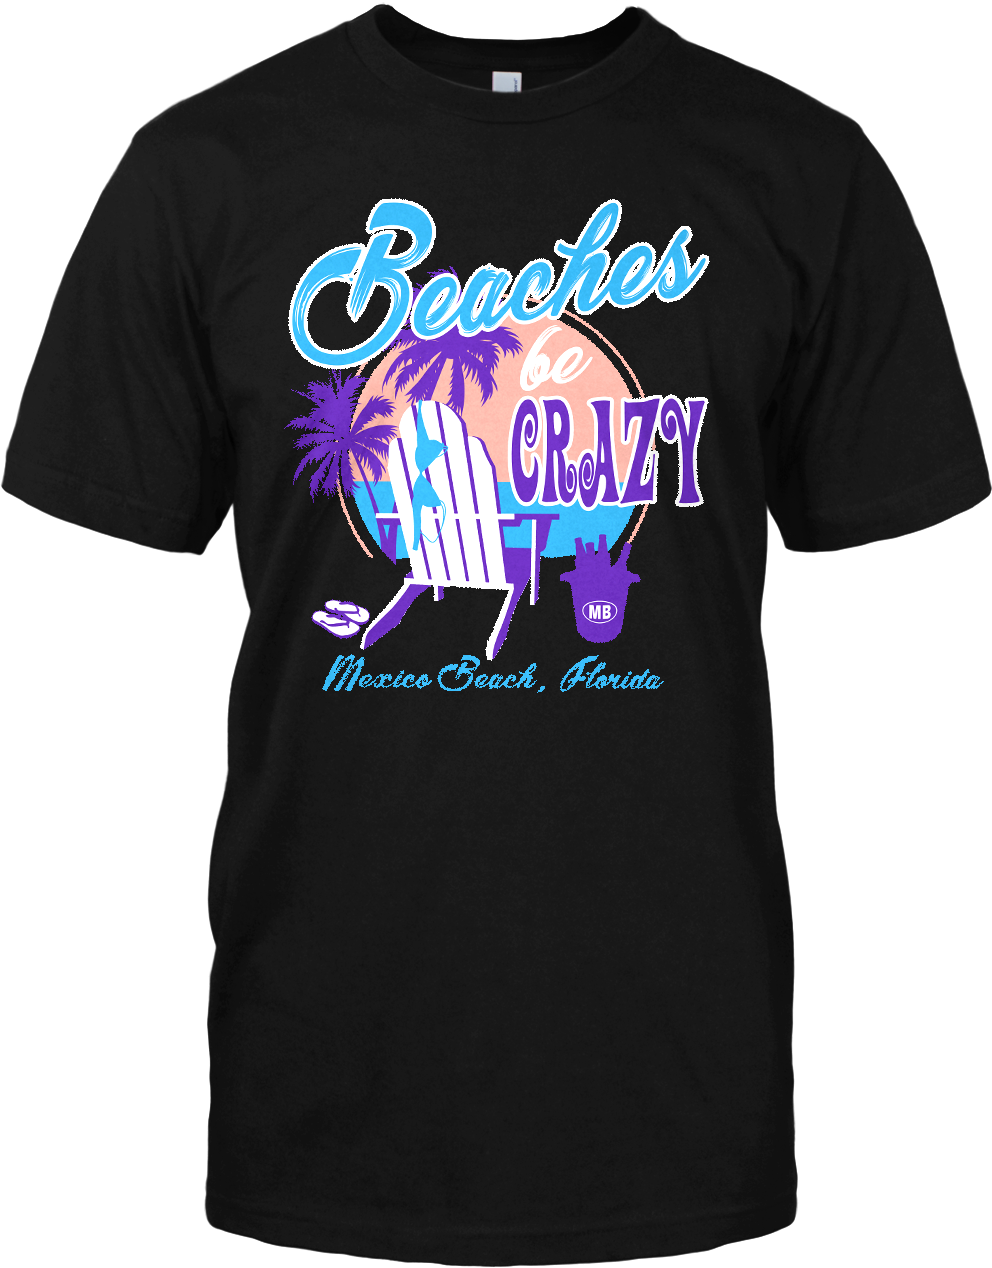 Mens Short Sleeve T-Shirt with Beaches Be Crazy Imprint